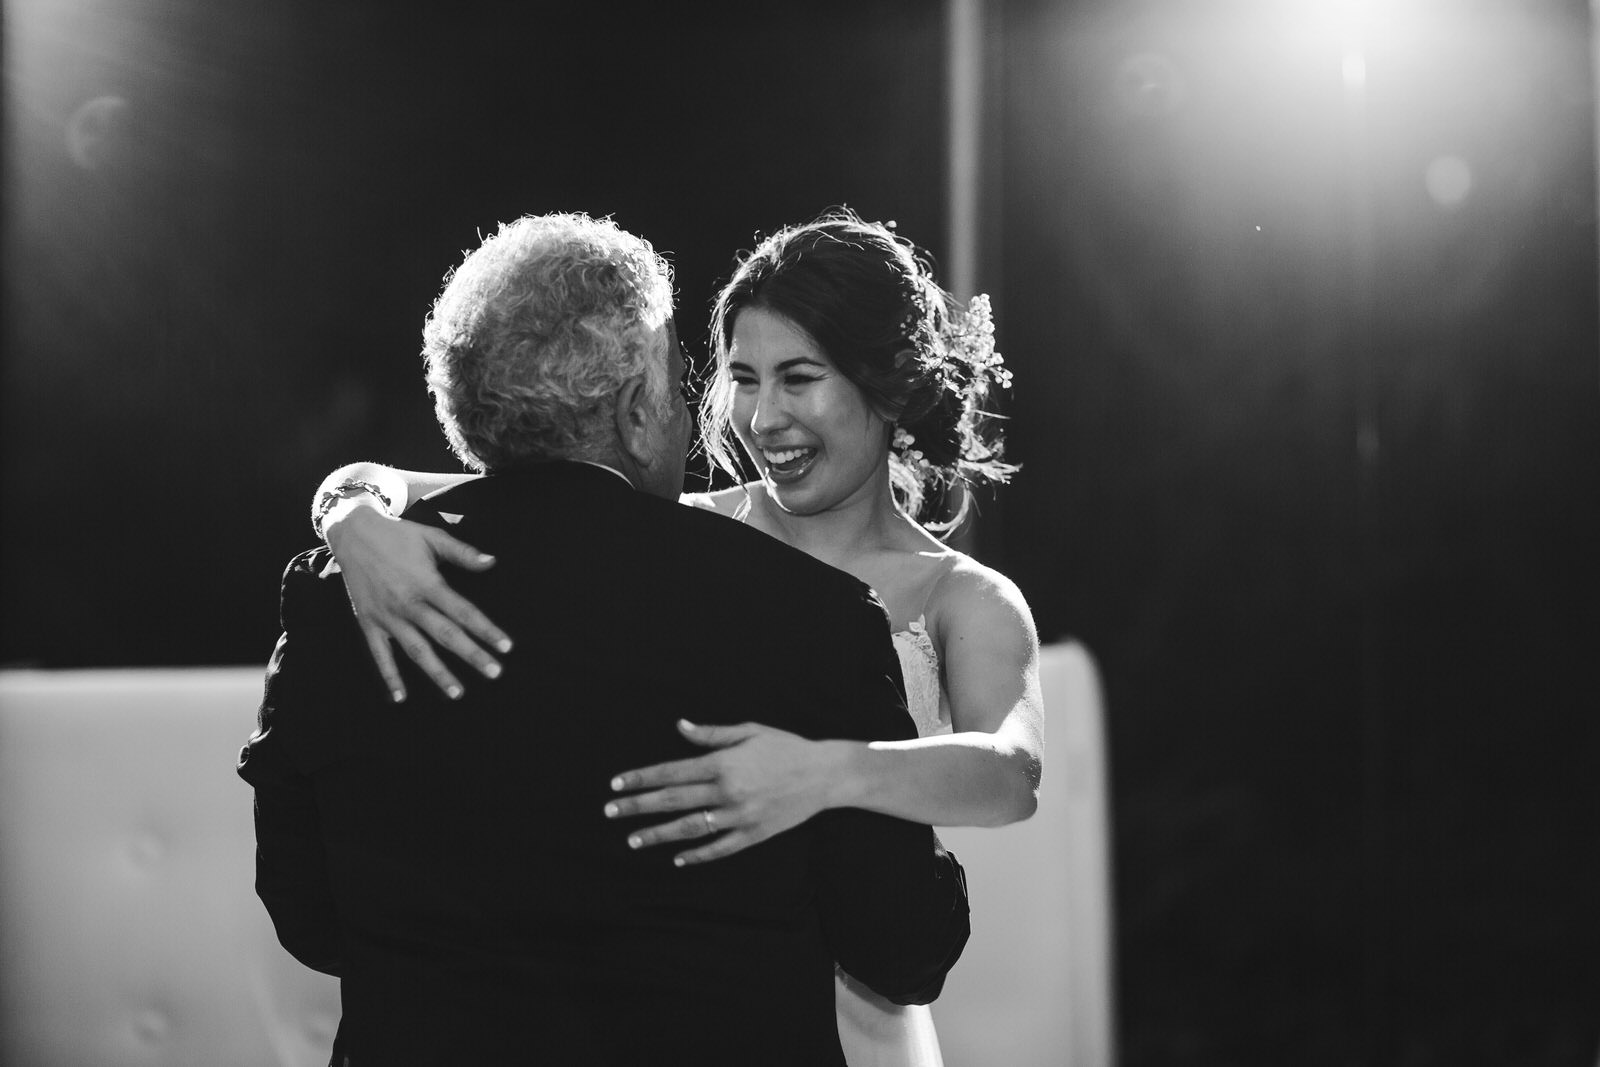 father_daughter_dance_black_and_white_emotional.jpg